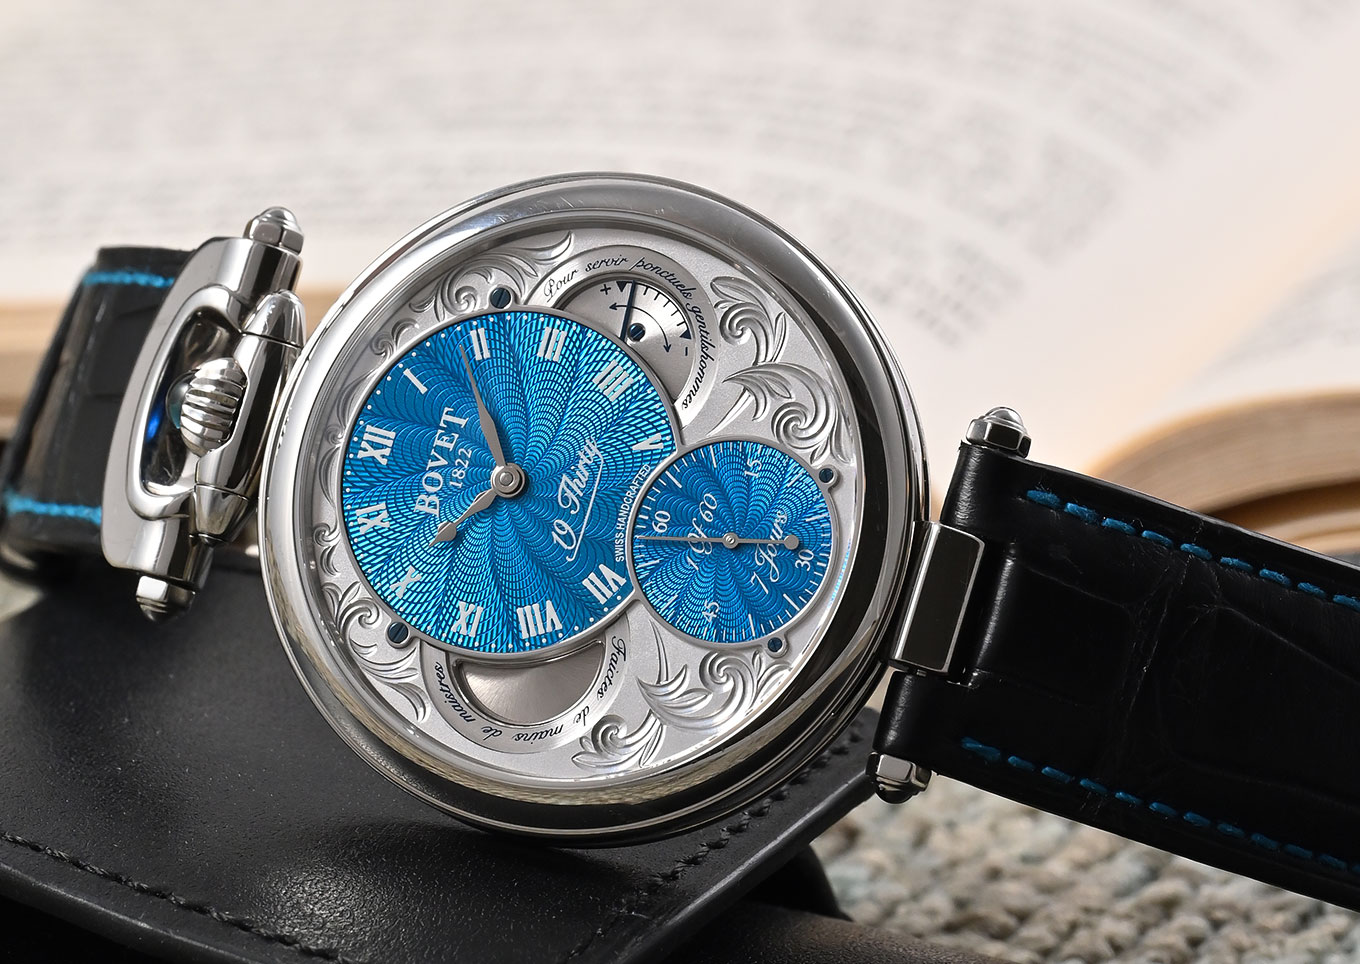 Bovet watches at second movement